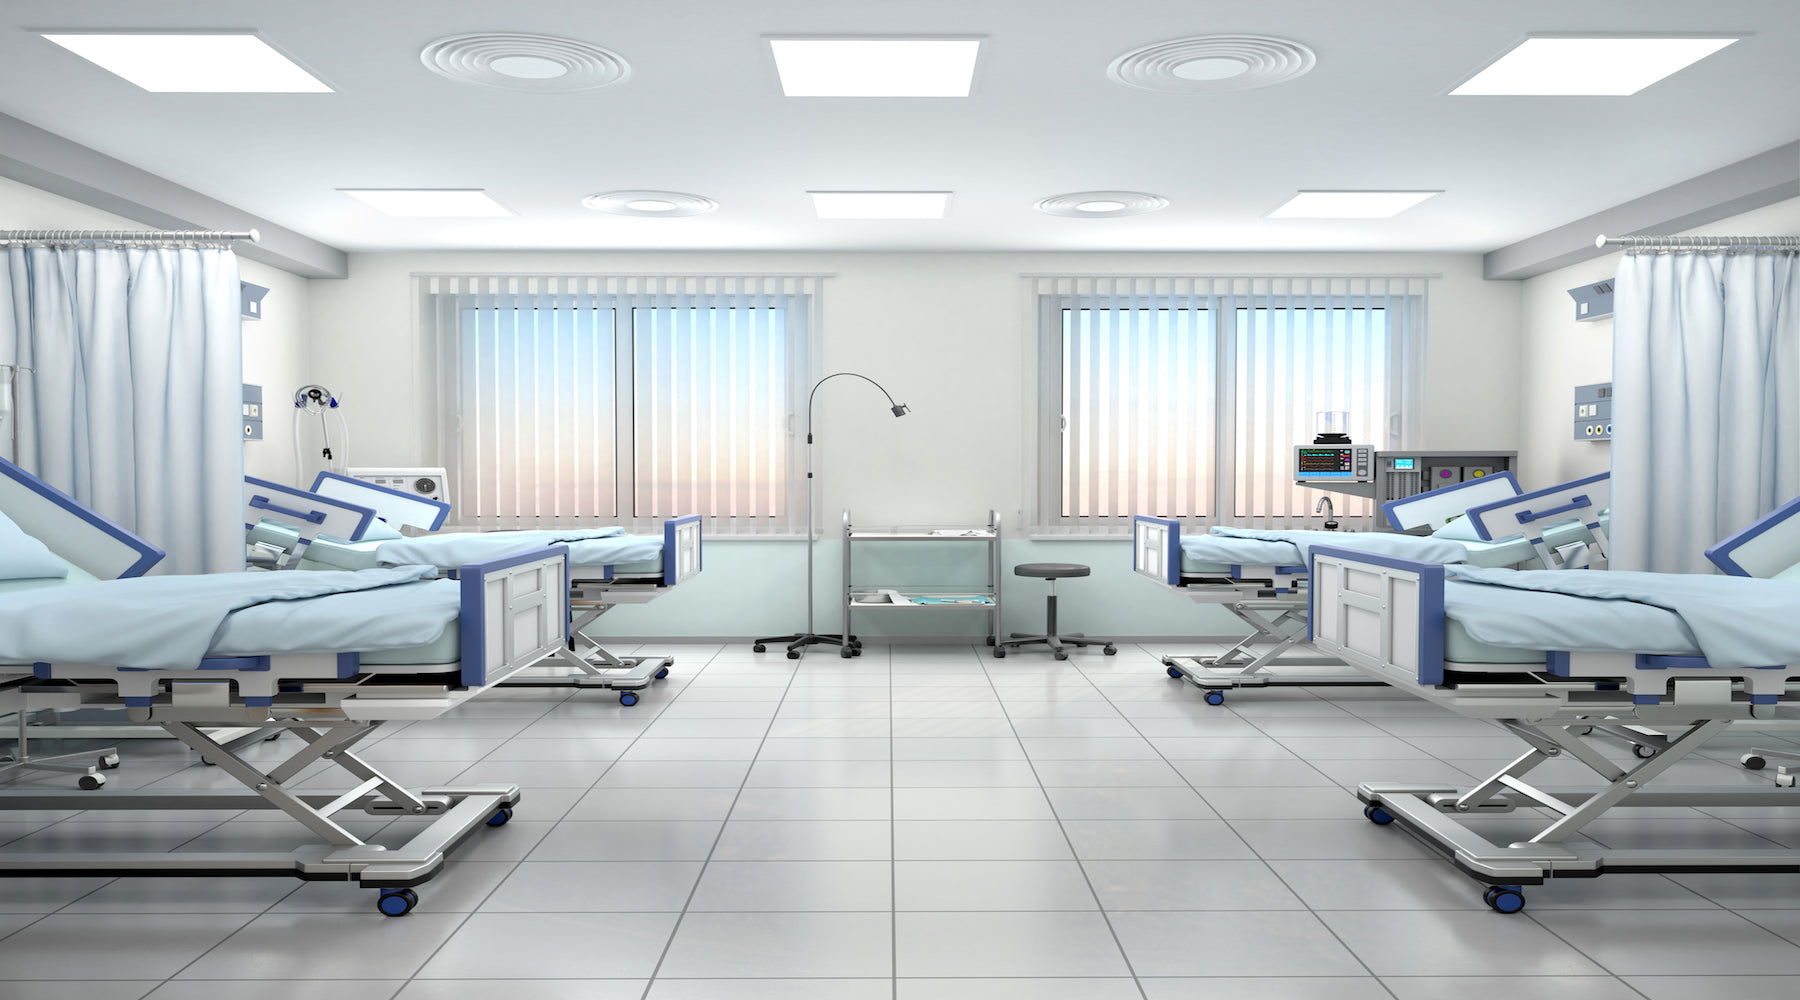 Hospital lighting with bright white color tones shown in hospital room with beds